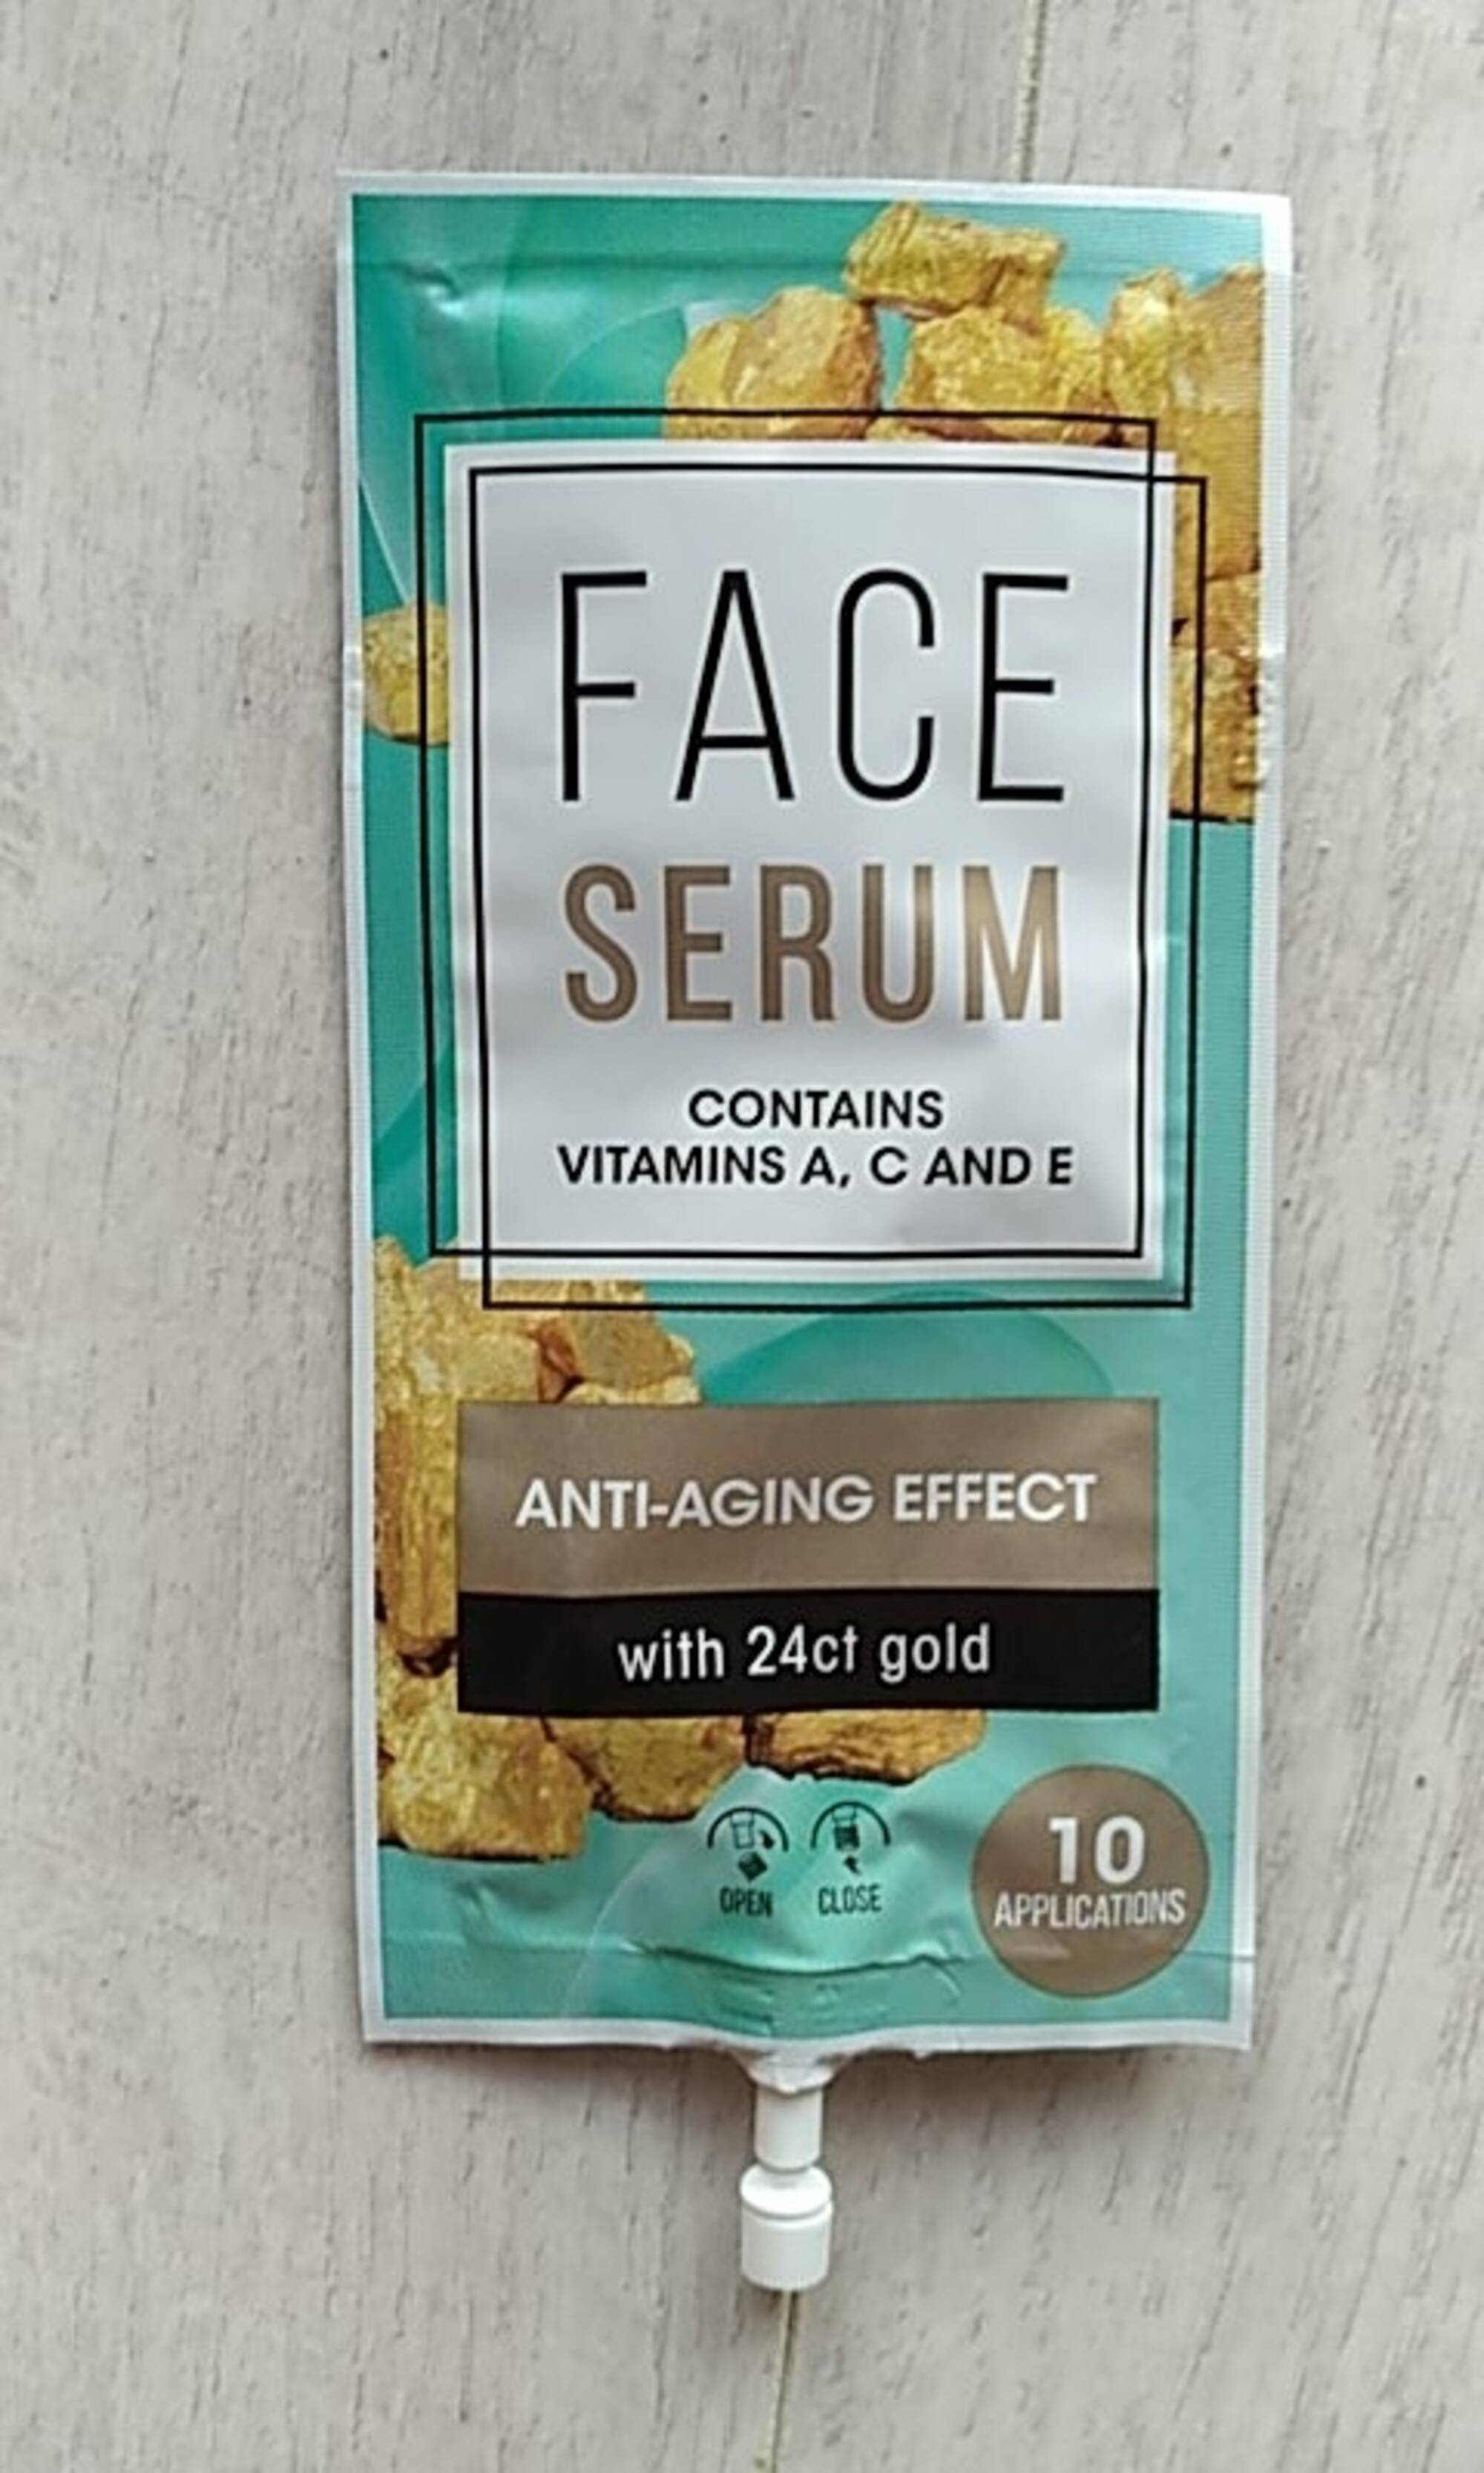 MASCOT EUROPE BV - Anti-aging effect - Face serum  with 24ct gold